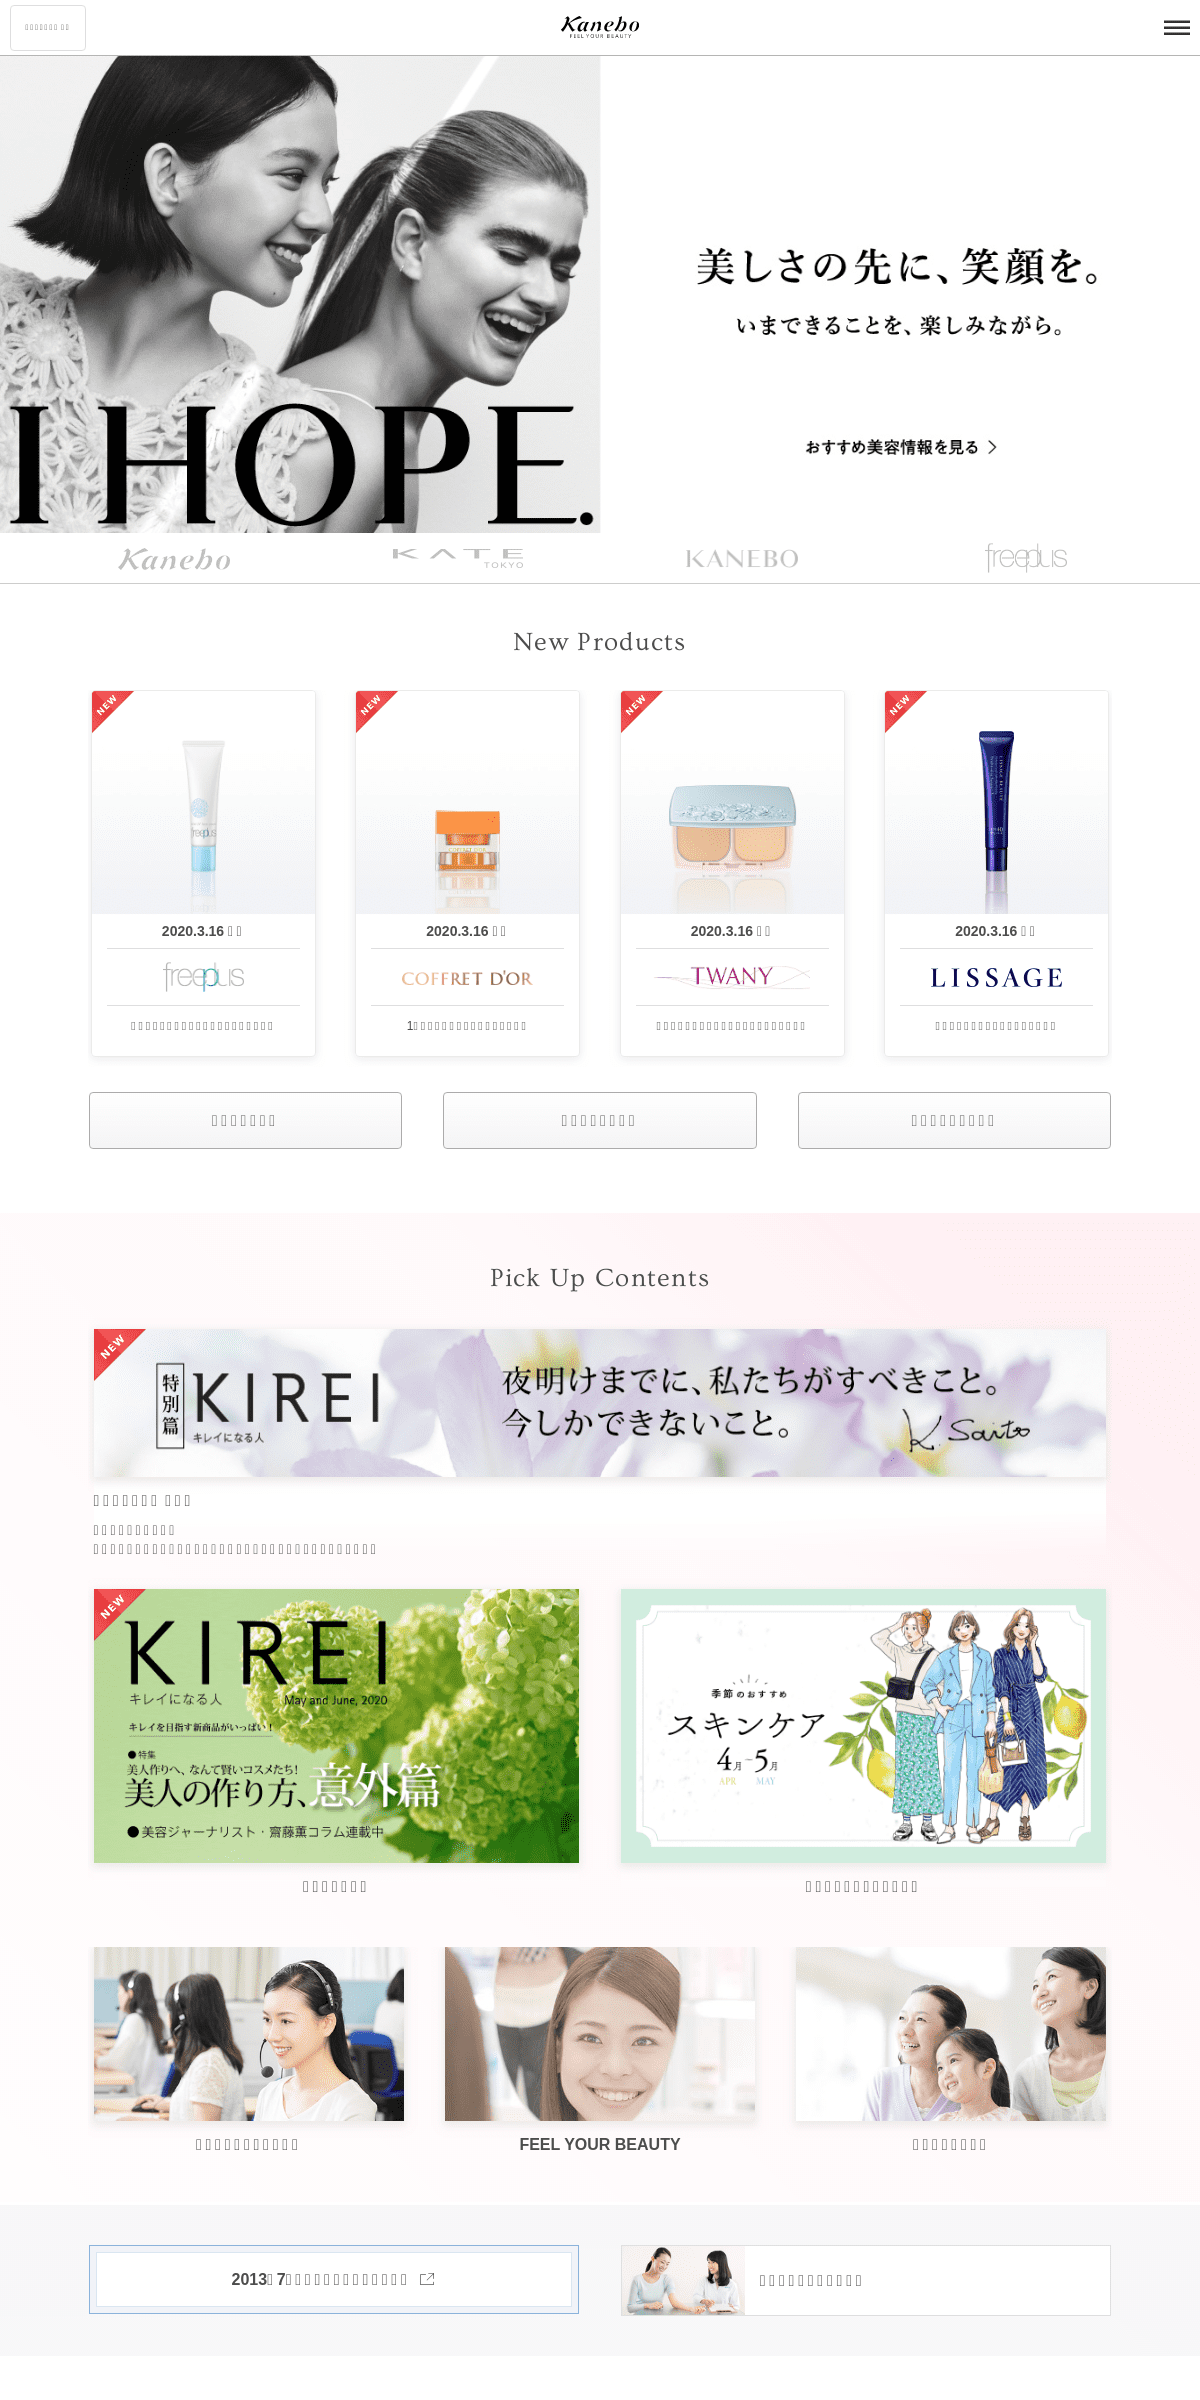 A complete backup of kanebo-cosmetics.co.jp